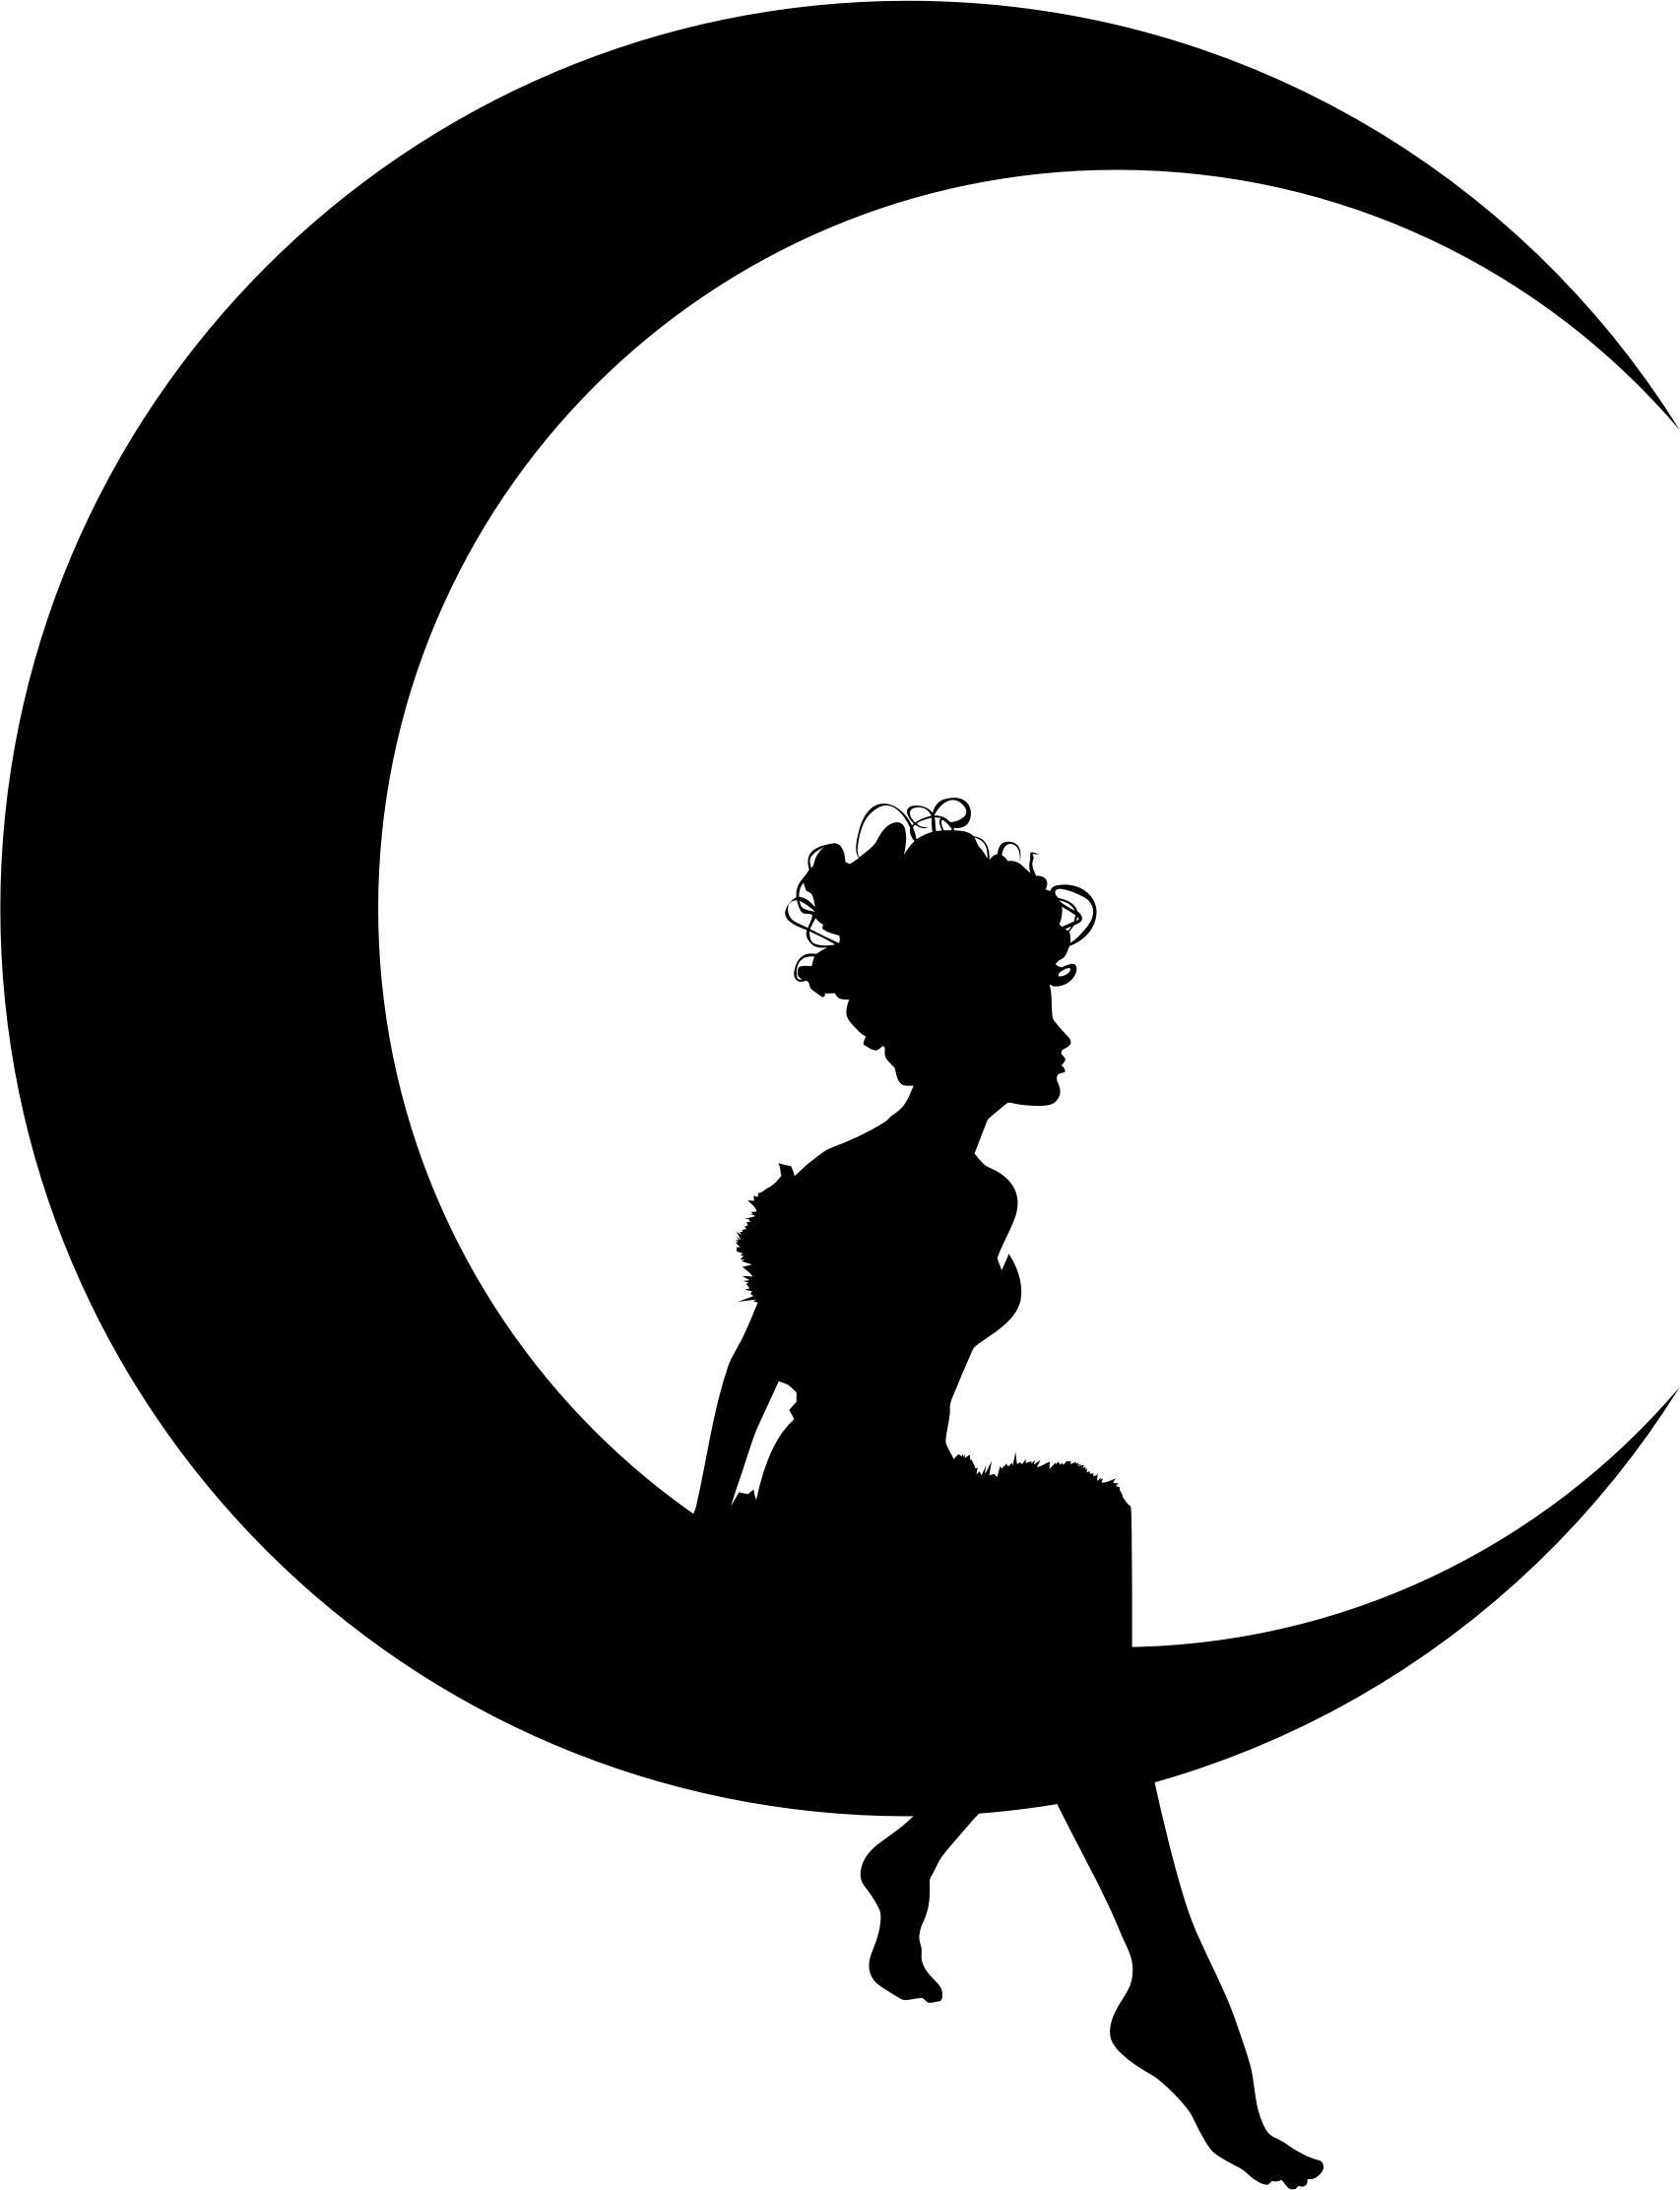 Fairy Sitting on Moon Crescent png icons